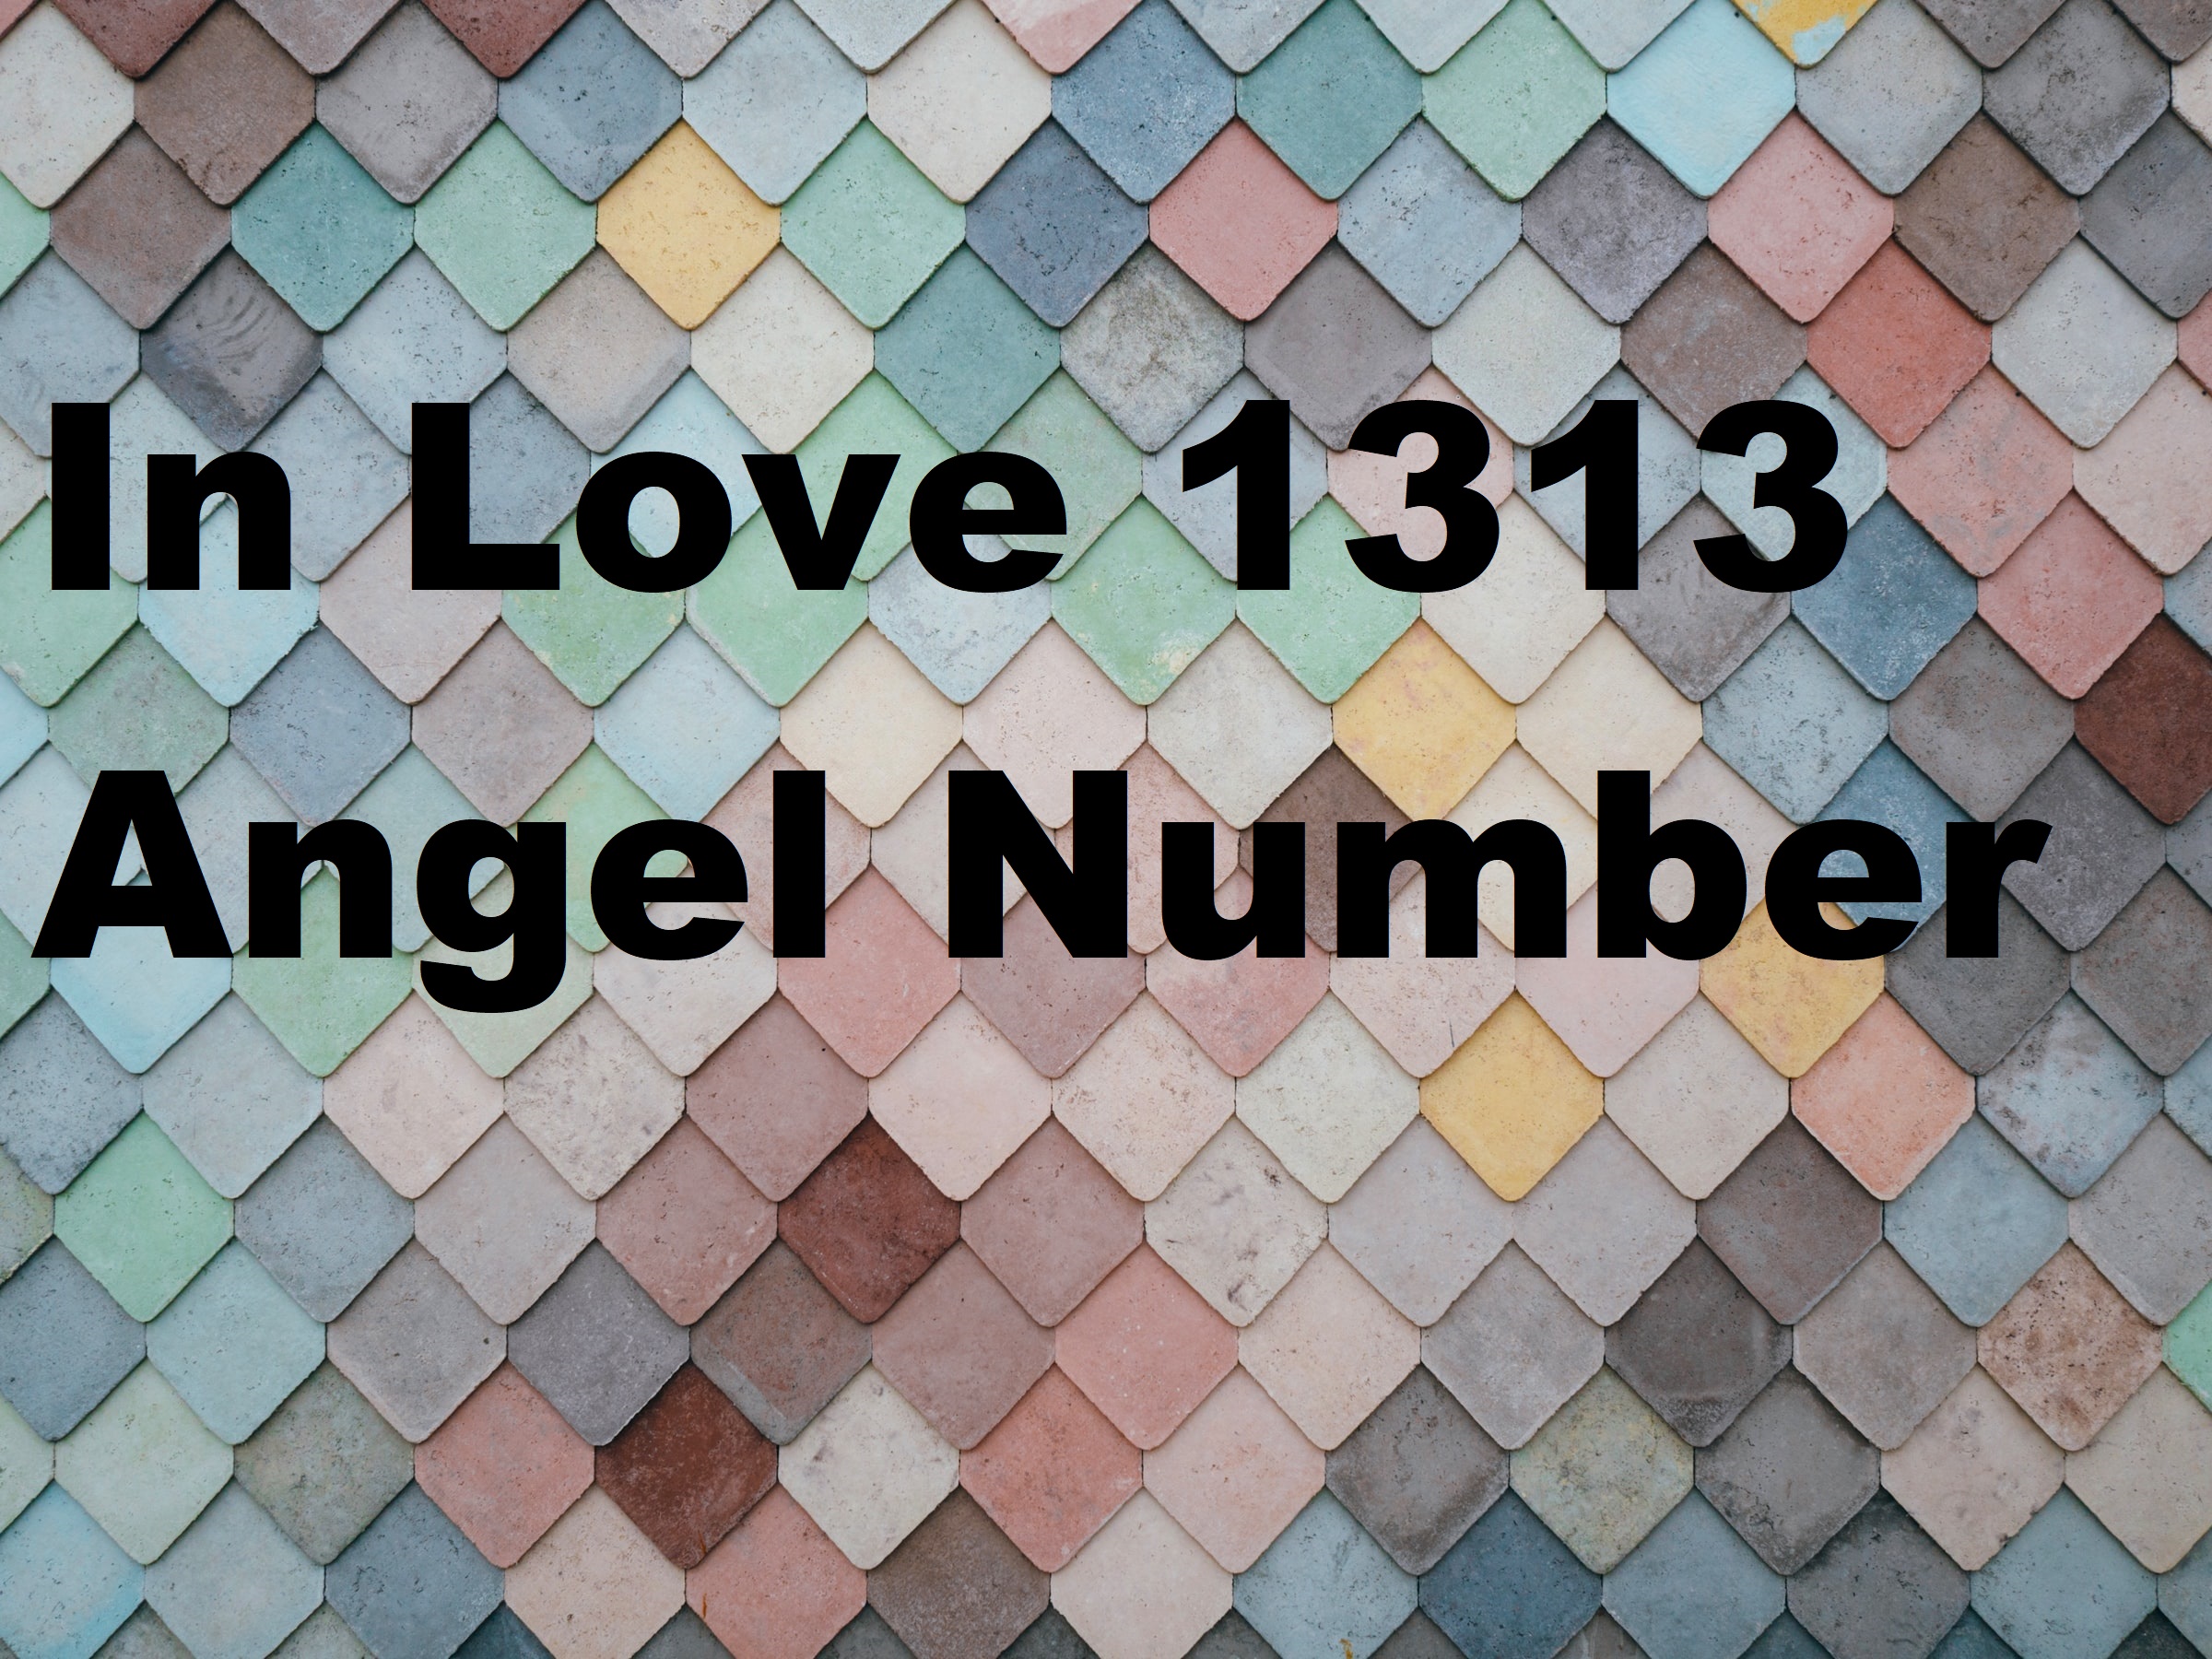 In Love 1313 Angel Number text in black font color written on a colorfol tiled wall